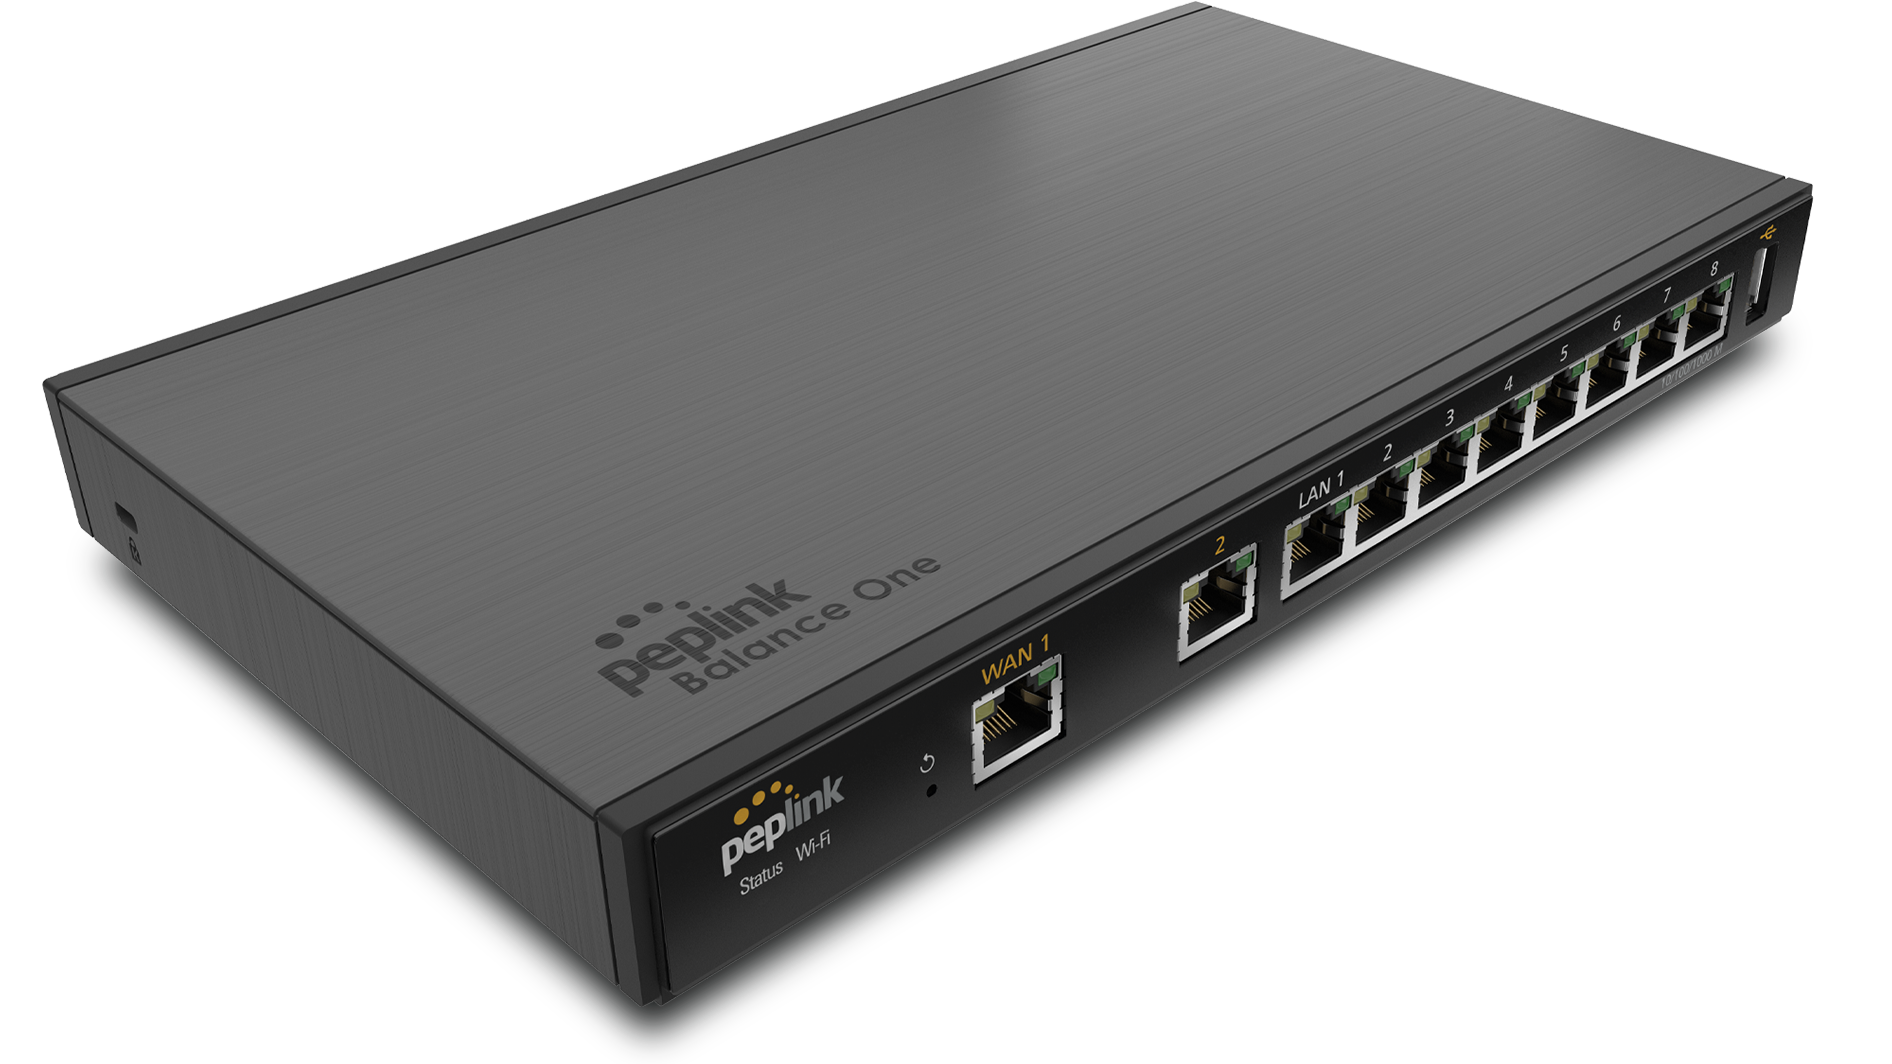 Advanced DualWAN Router with an impressive range of features Premier